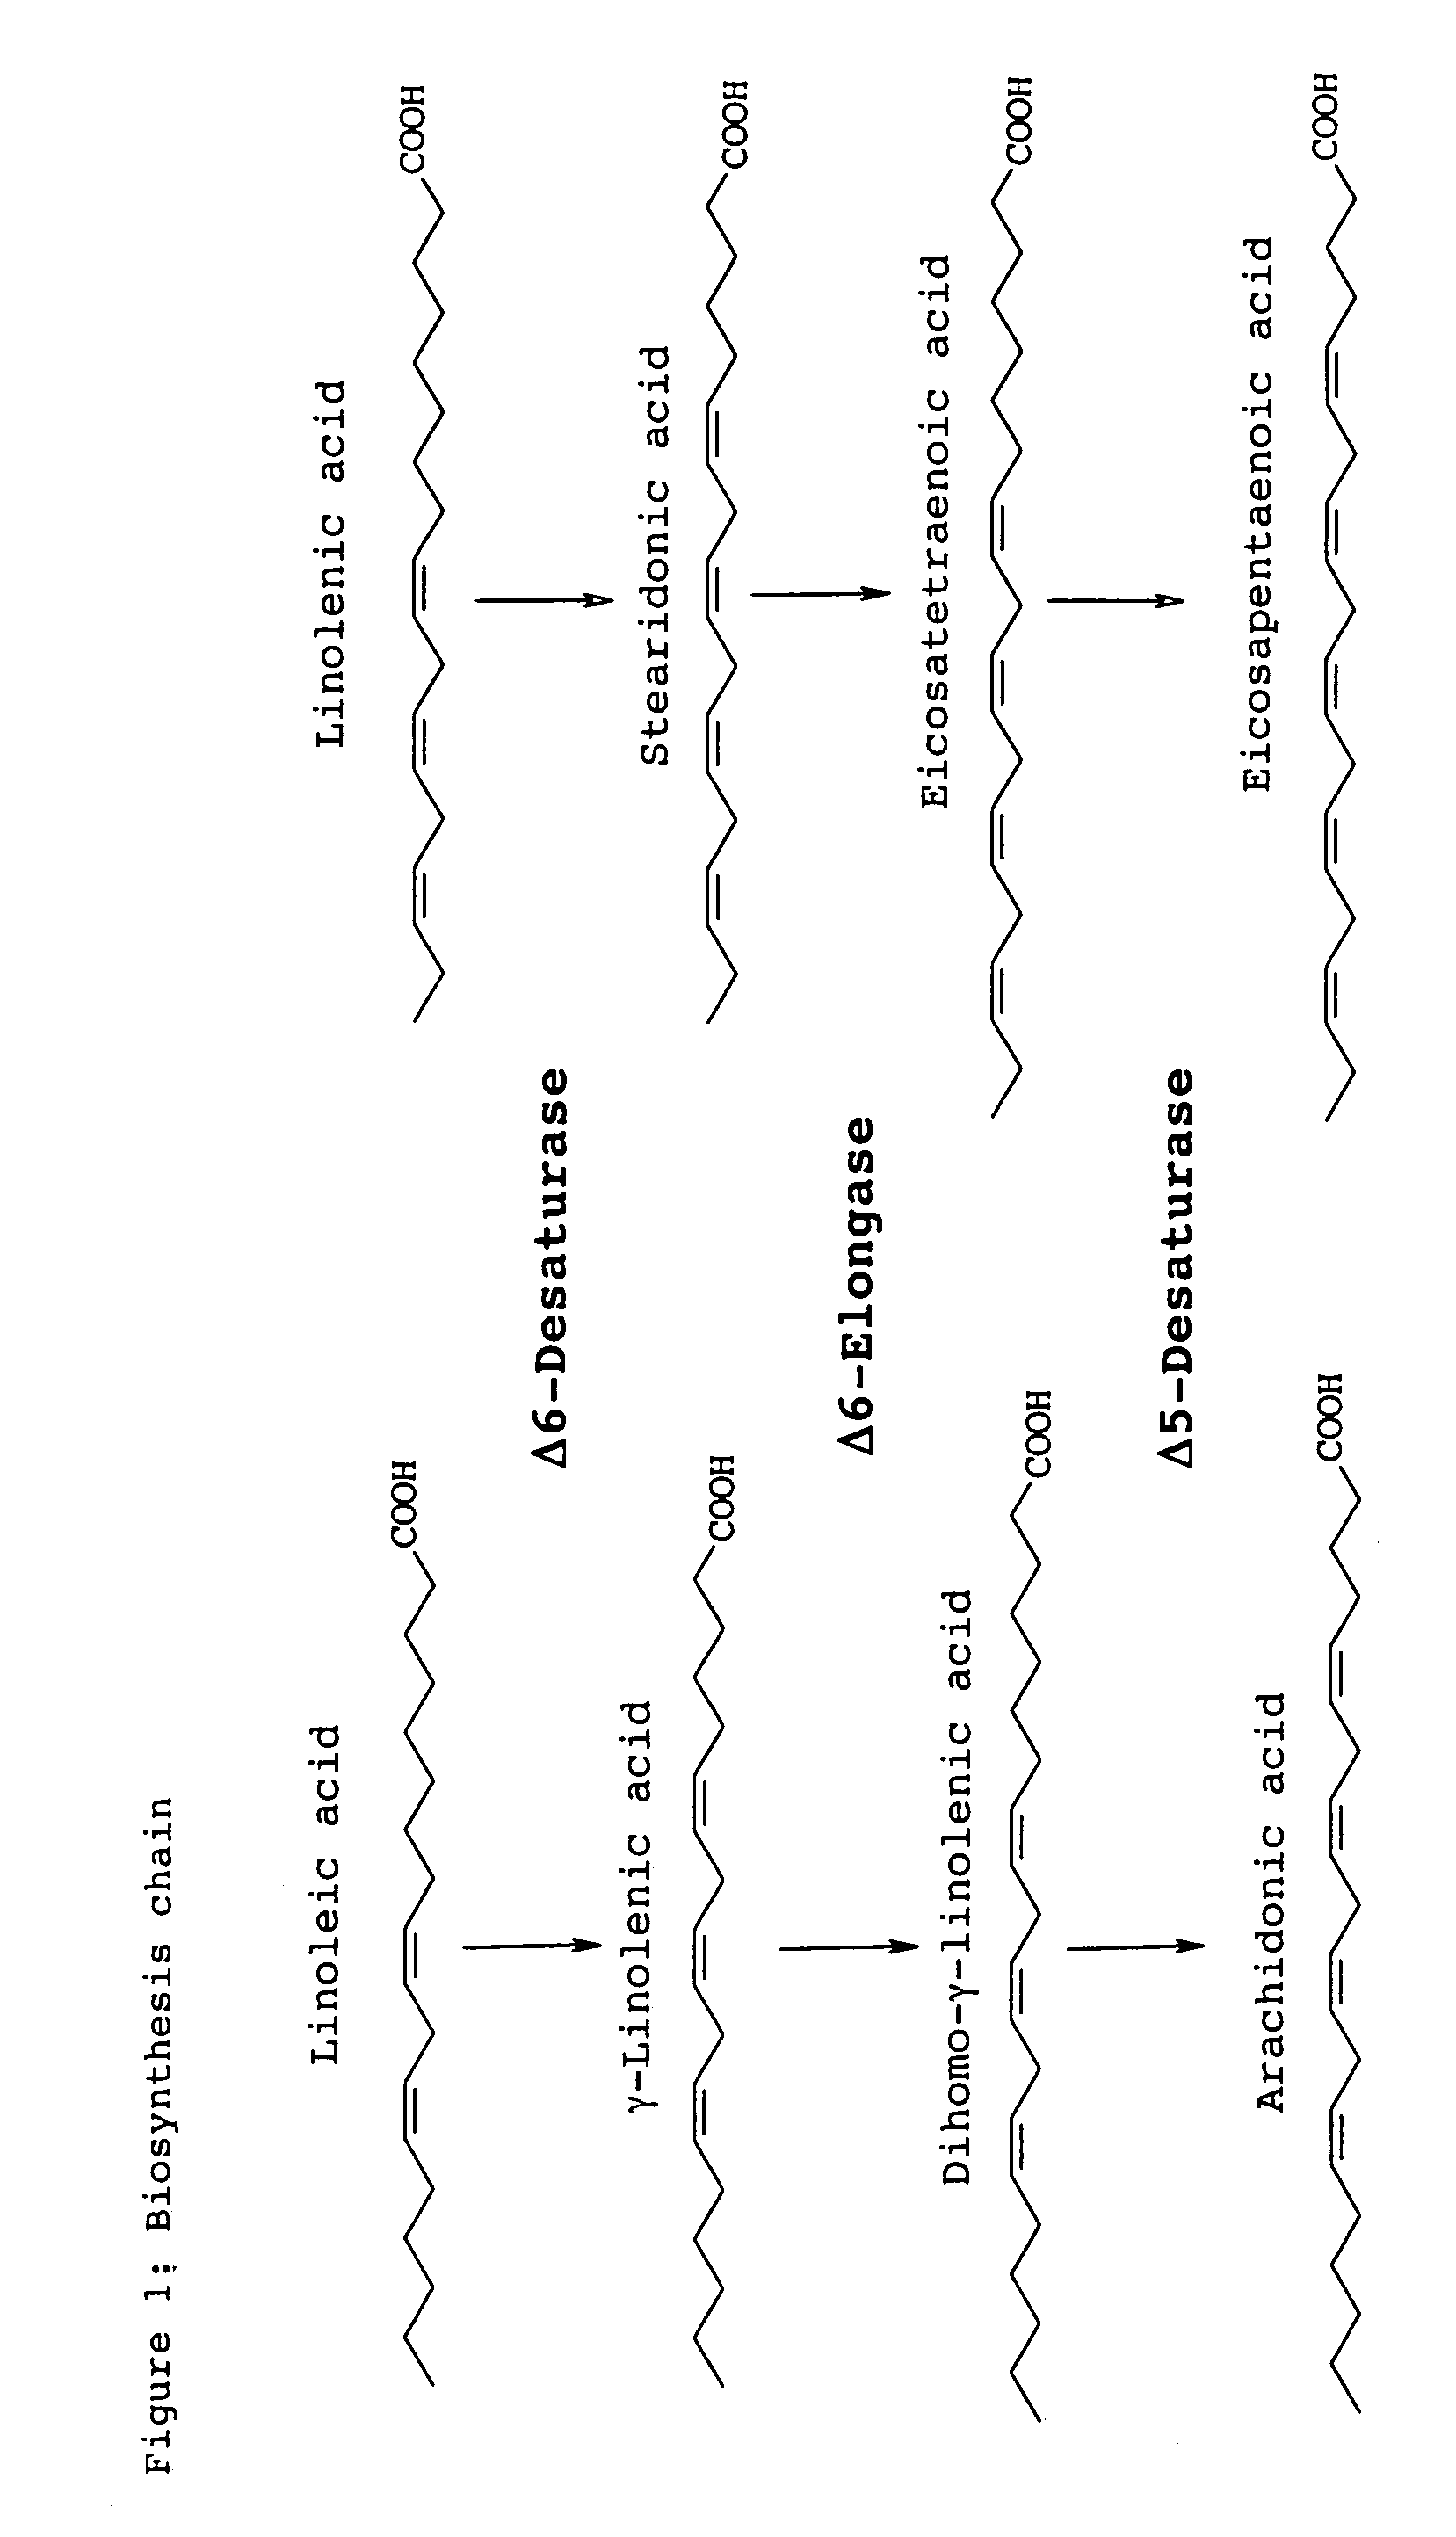 Method for producing multiple unsaturated fatty acids in plants